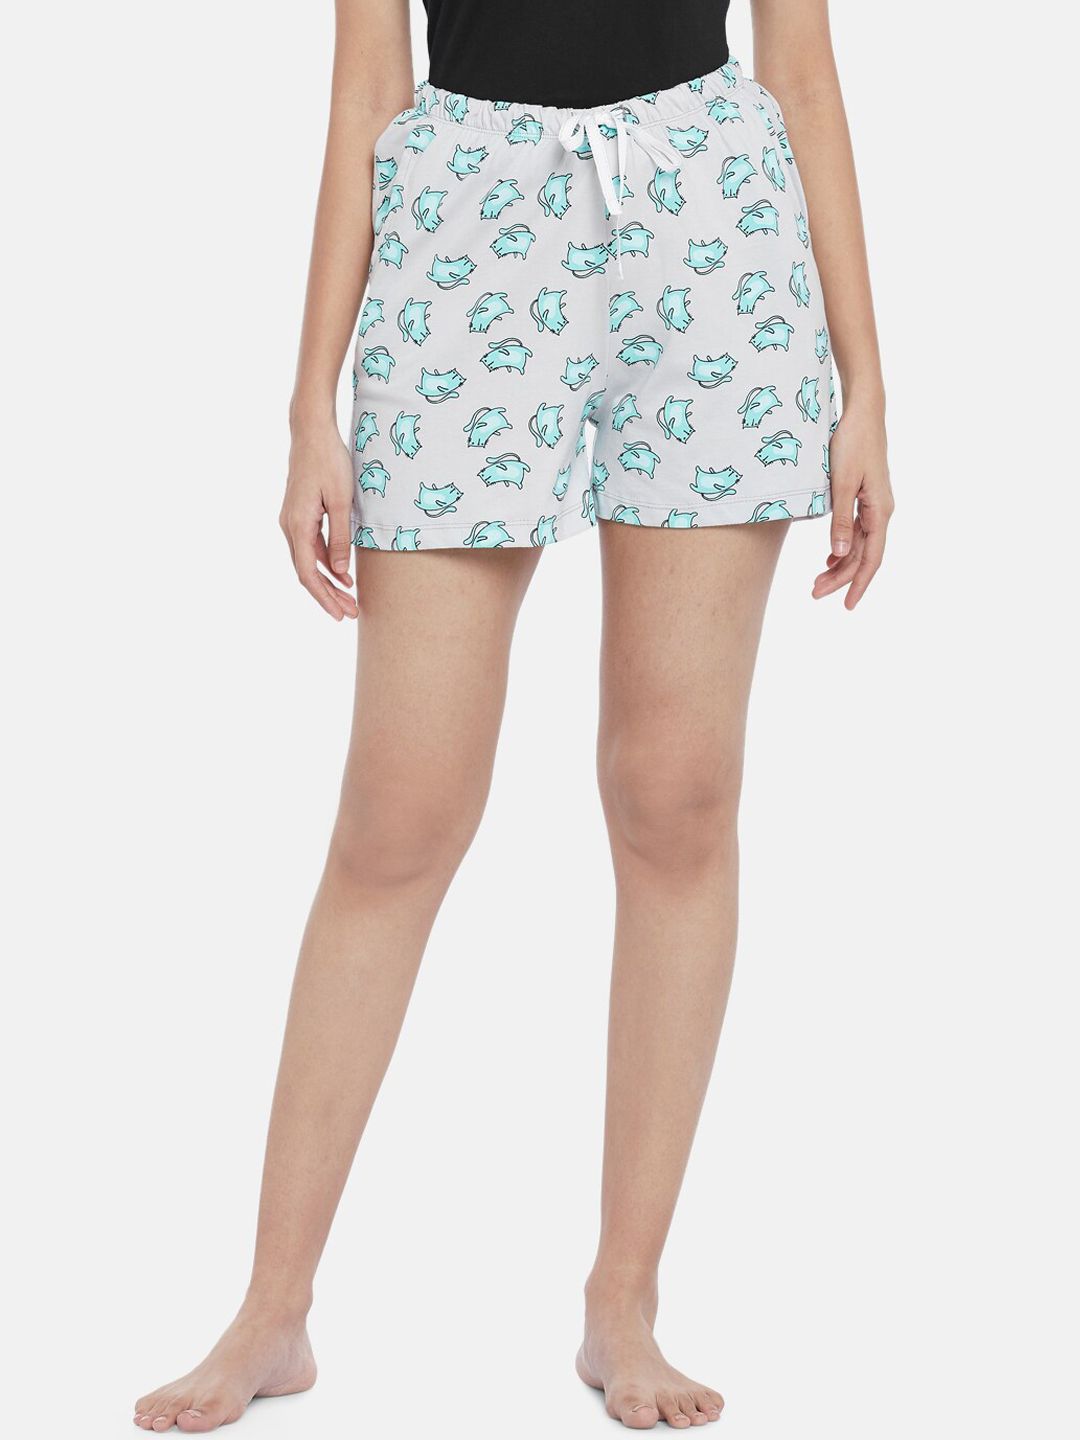 Dreamz by Pantaloons Women Grey Printed Lounge Shorts Price in India